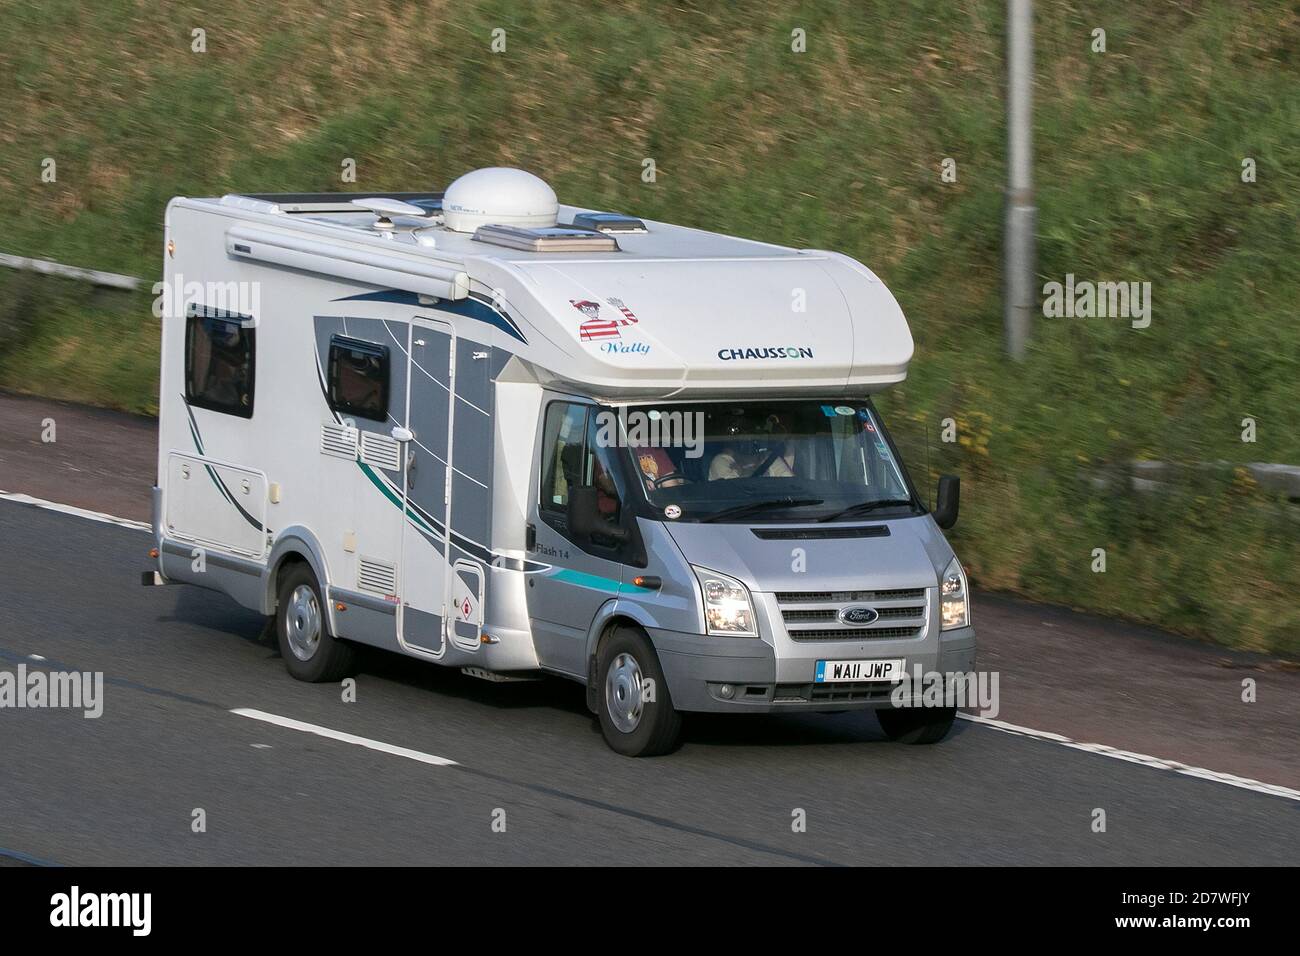 Chausson motorhome Caravans and Motorhomes campervans on Britain's roads, RV leisure vehicle, family holidays caravanette vacations Stock Photo